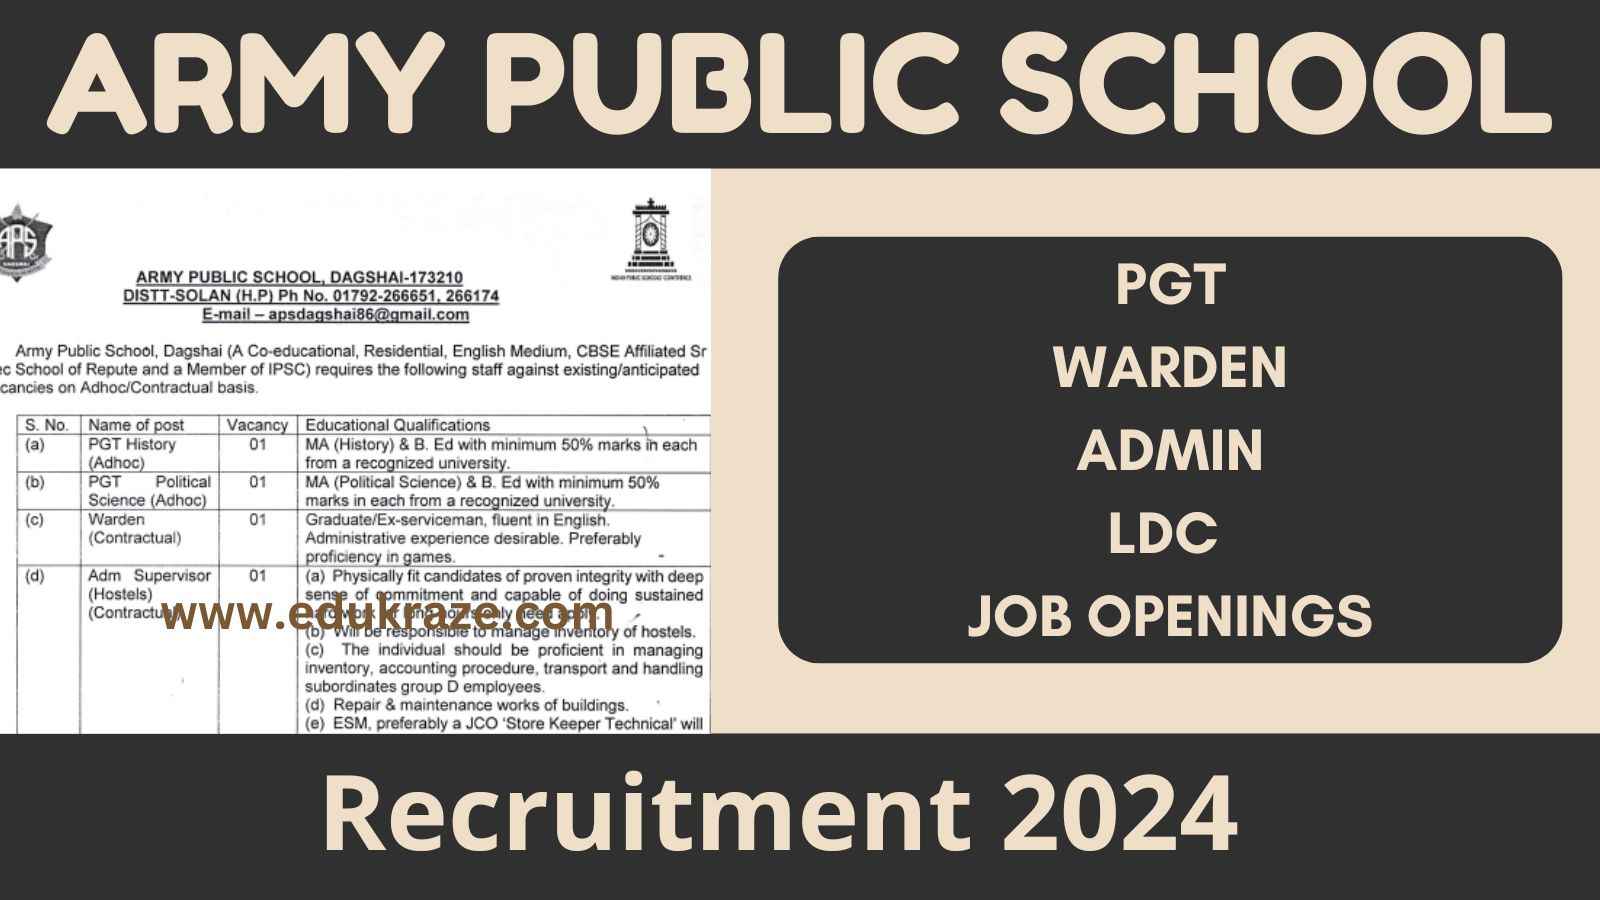 PGT, Warden, LDC, & Other Job Opening at Army Public School!